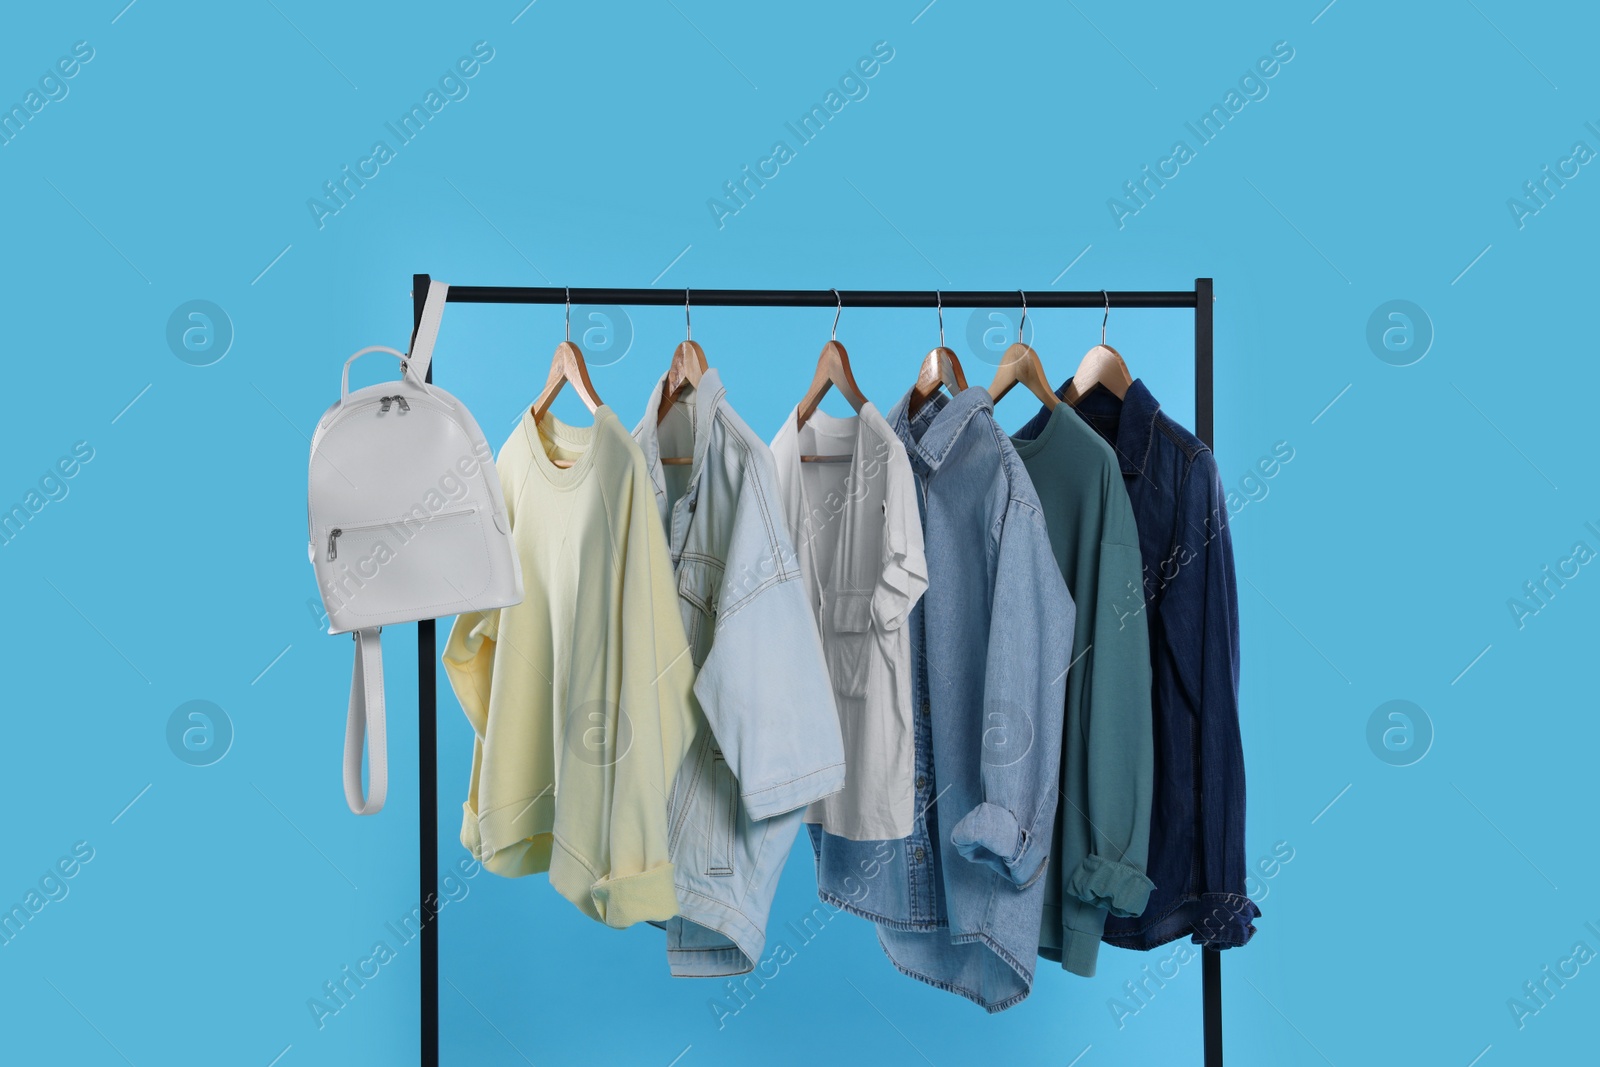 Photo of Rack with bag and stylish clothes on wooden hangers against light blue background